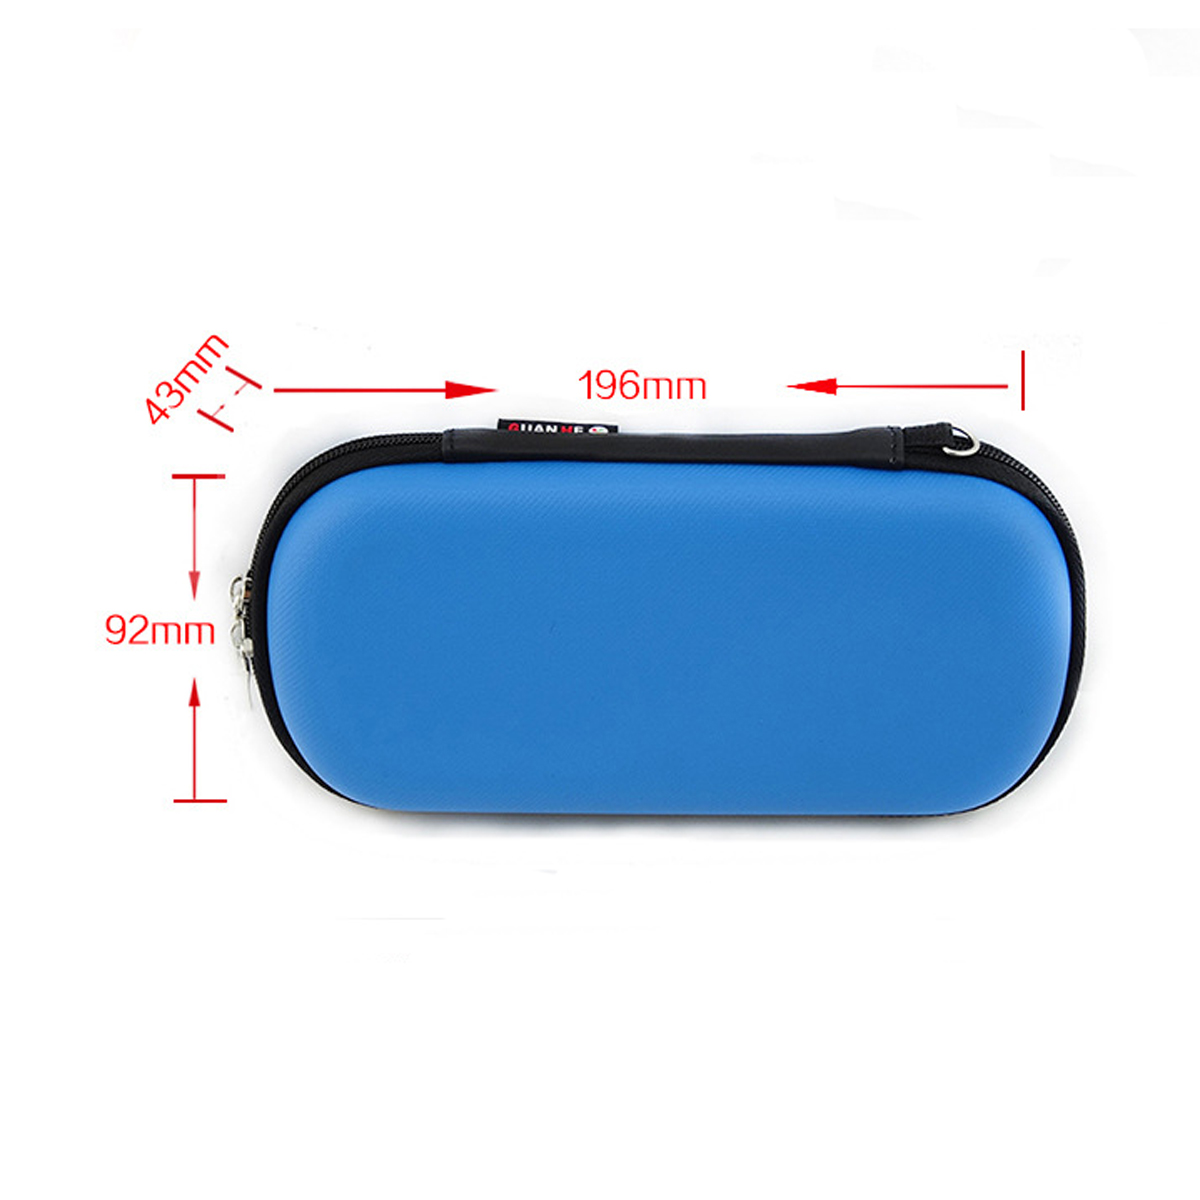 Multifunctional-EVA-Bag-For-TF-Data-Cable-USB-Flash-Drive-Hard-Disk-Cell-Phone-Holder-Waterproof-Dig-1890378-2